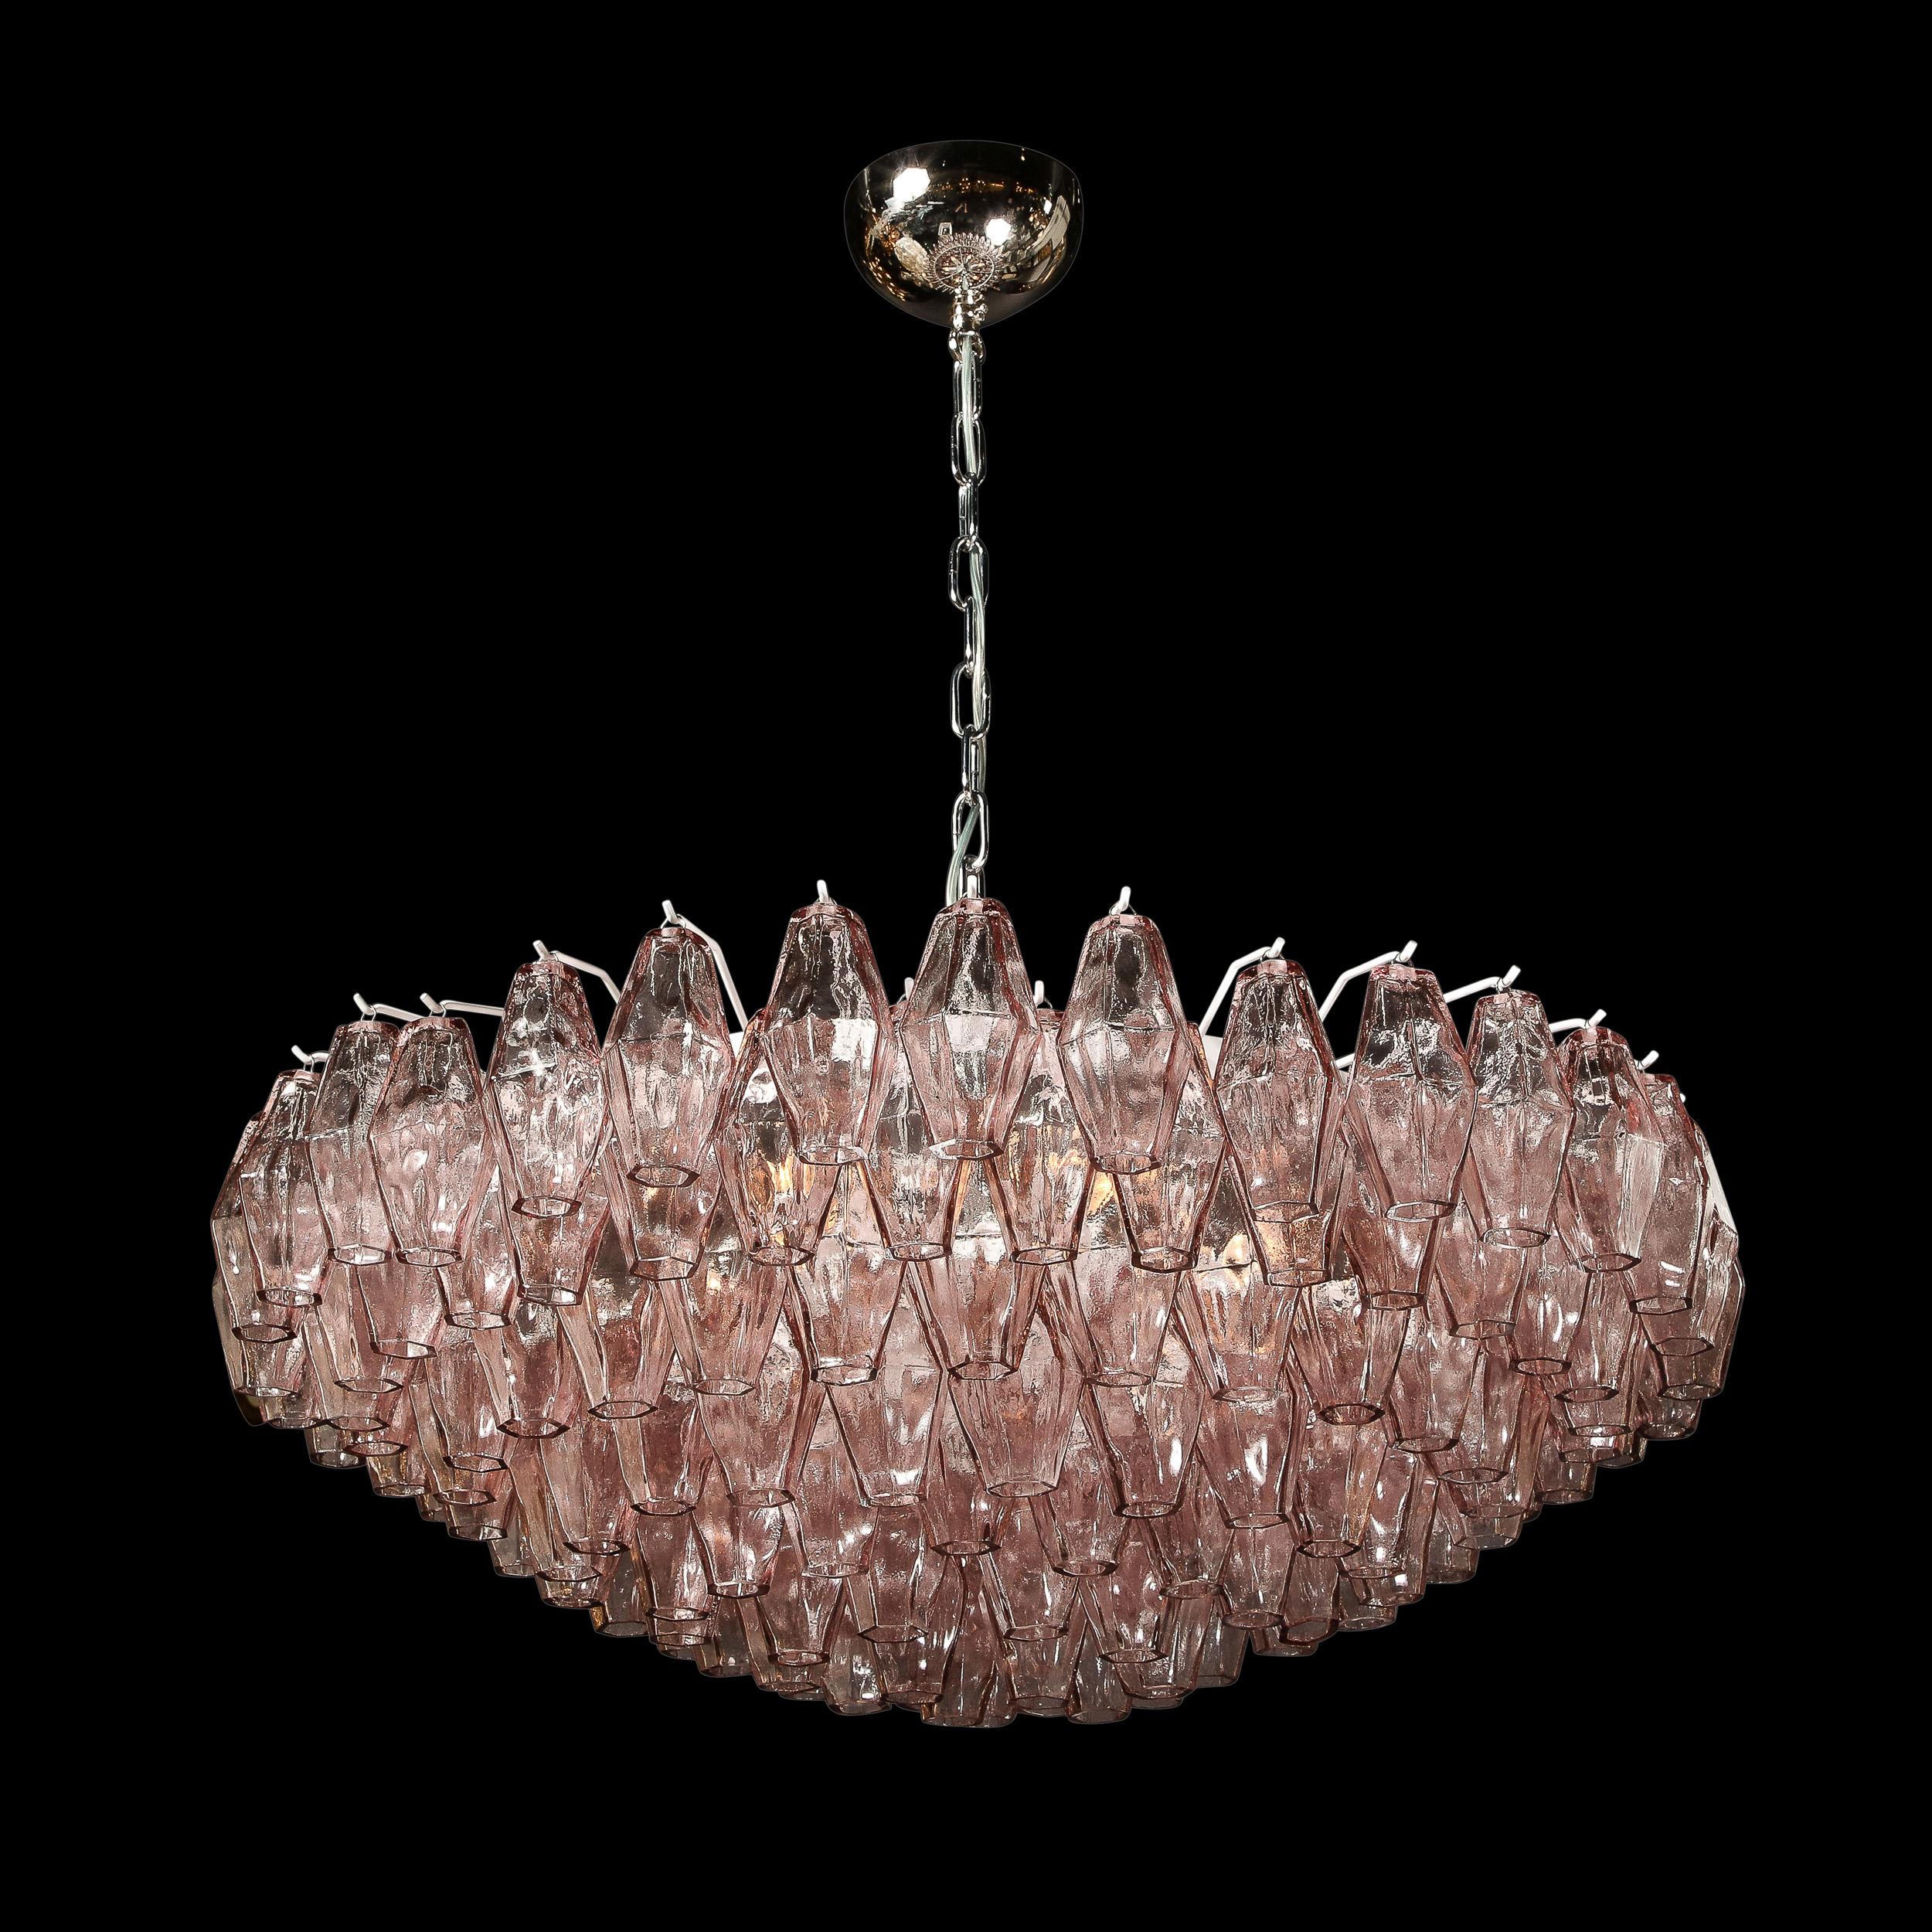 Modern Hand-Blown Murano Glass Polyhedral Chandelier in Smoked Amethyst